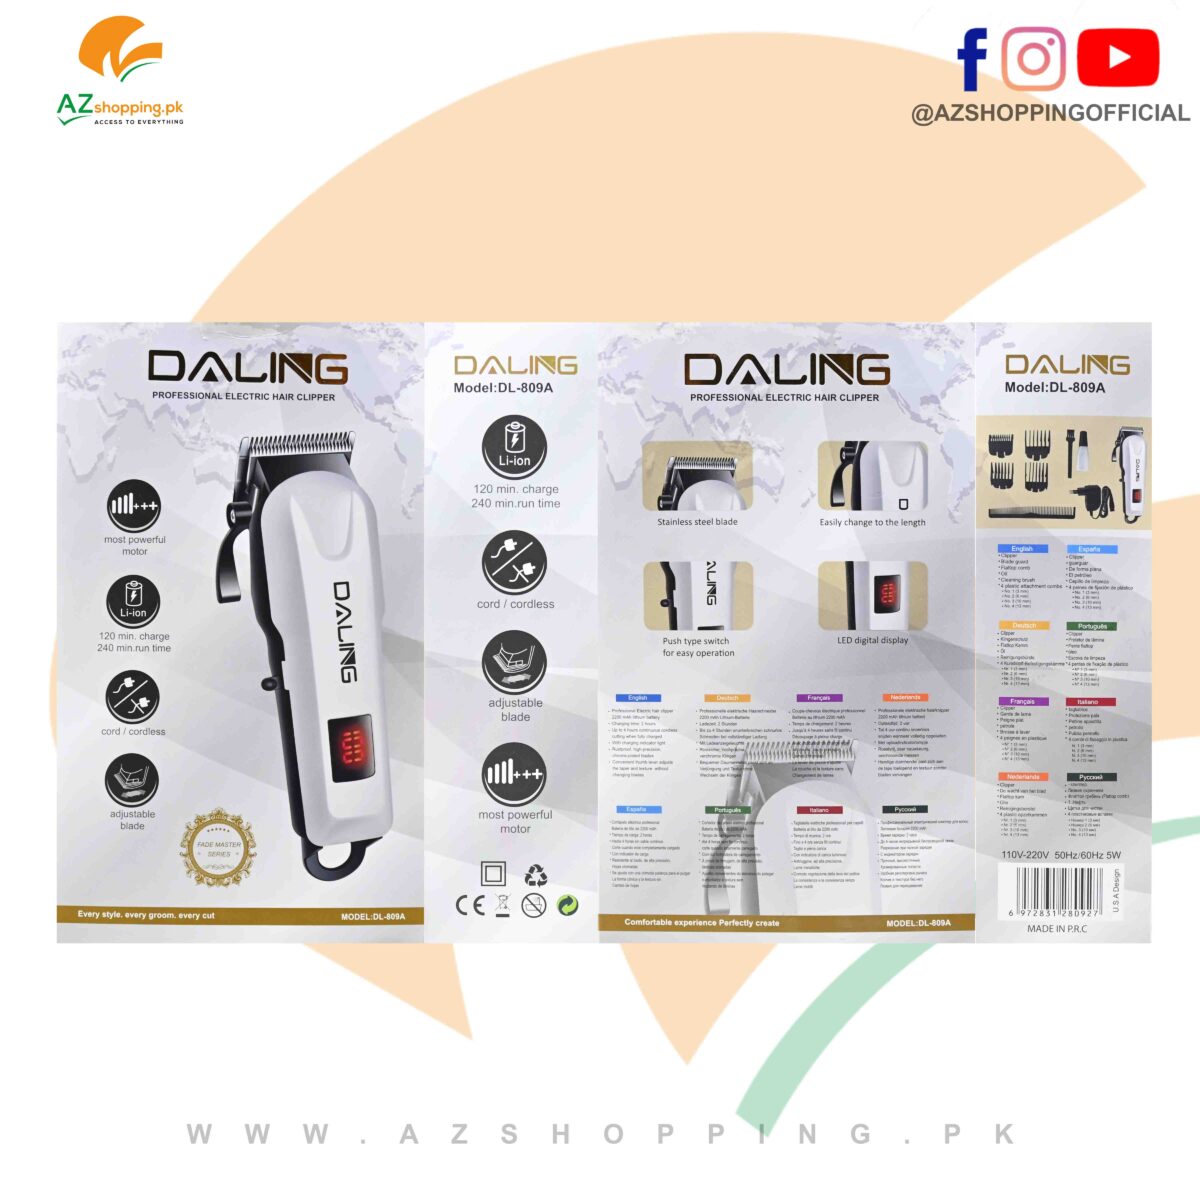 Daling – Professional Electric Hair Clipper, Trimmer, Groomer & Shaver Machine with LED Digital Display, Cord/Cordless & Adjustable Stainless Steel Blade – Model: DL-809A